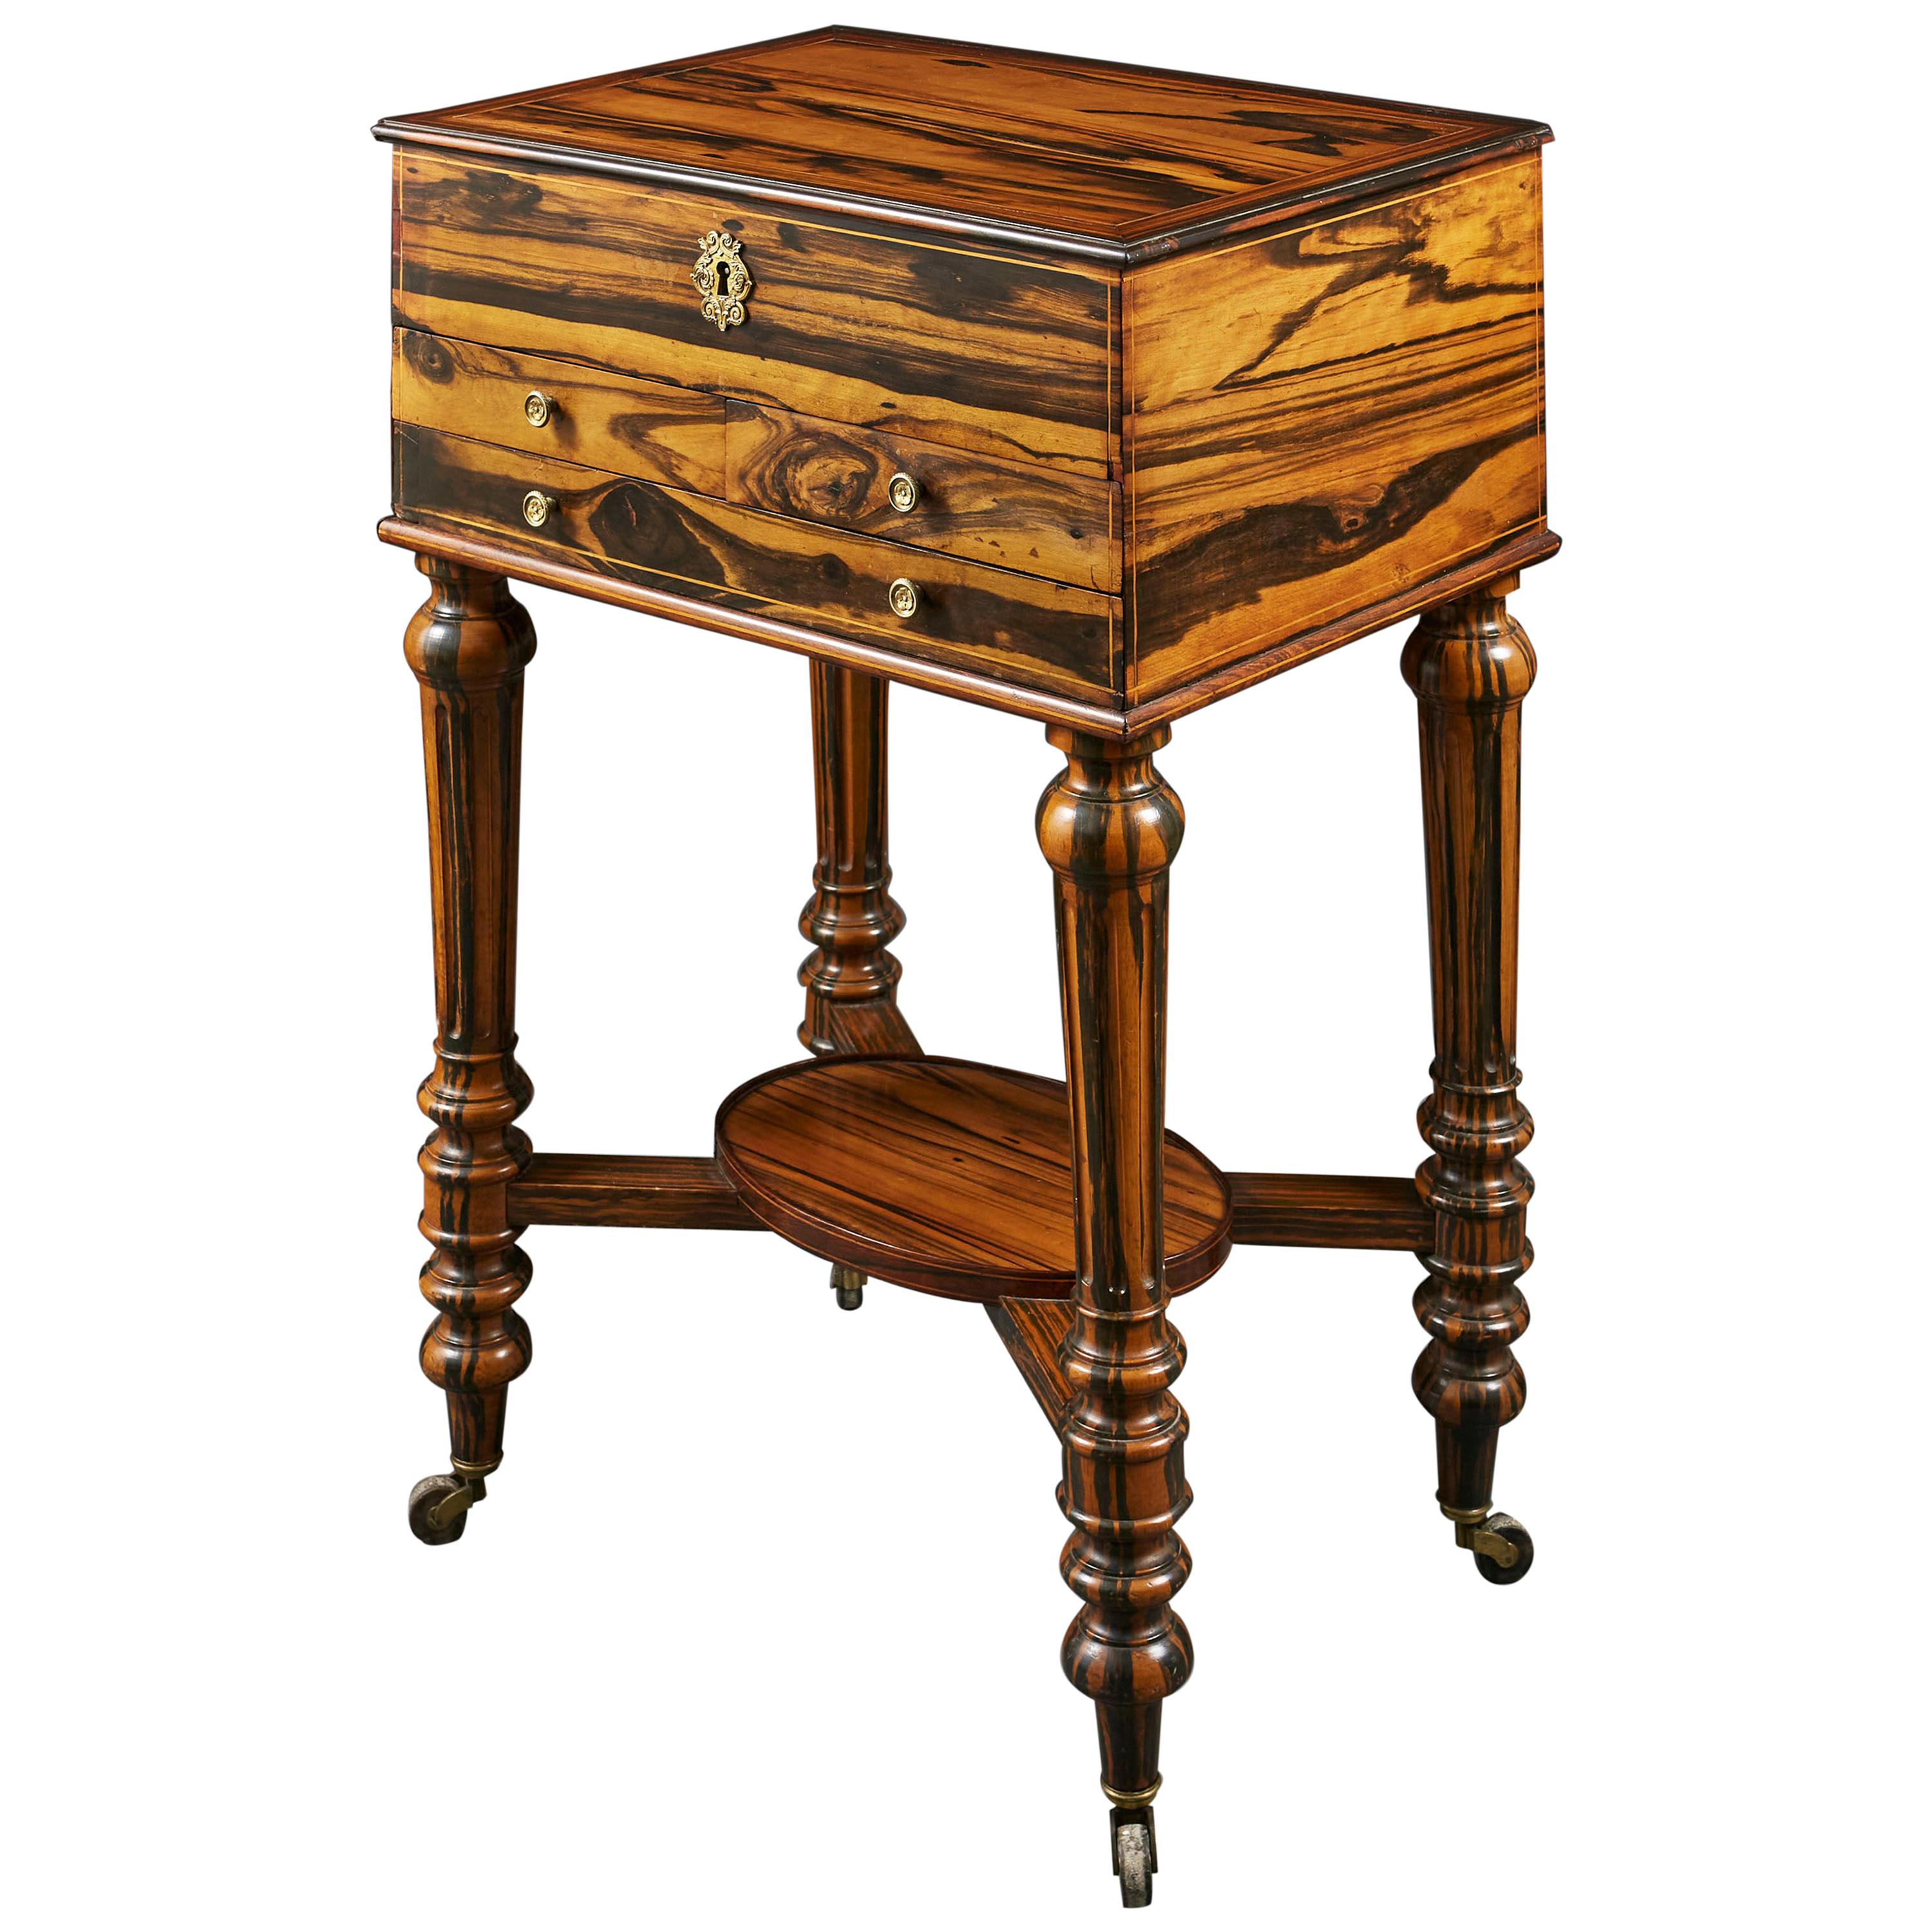 A French Mid 19th Century Coromandel Wood Bedside Table For Sale